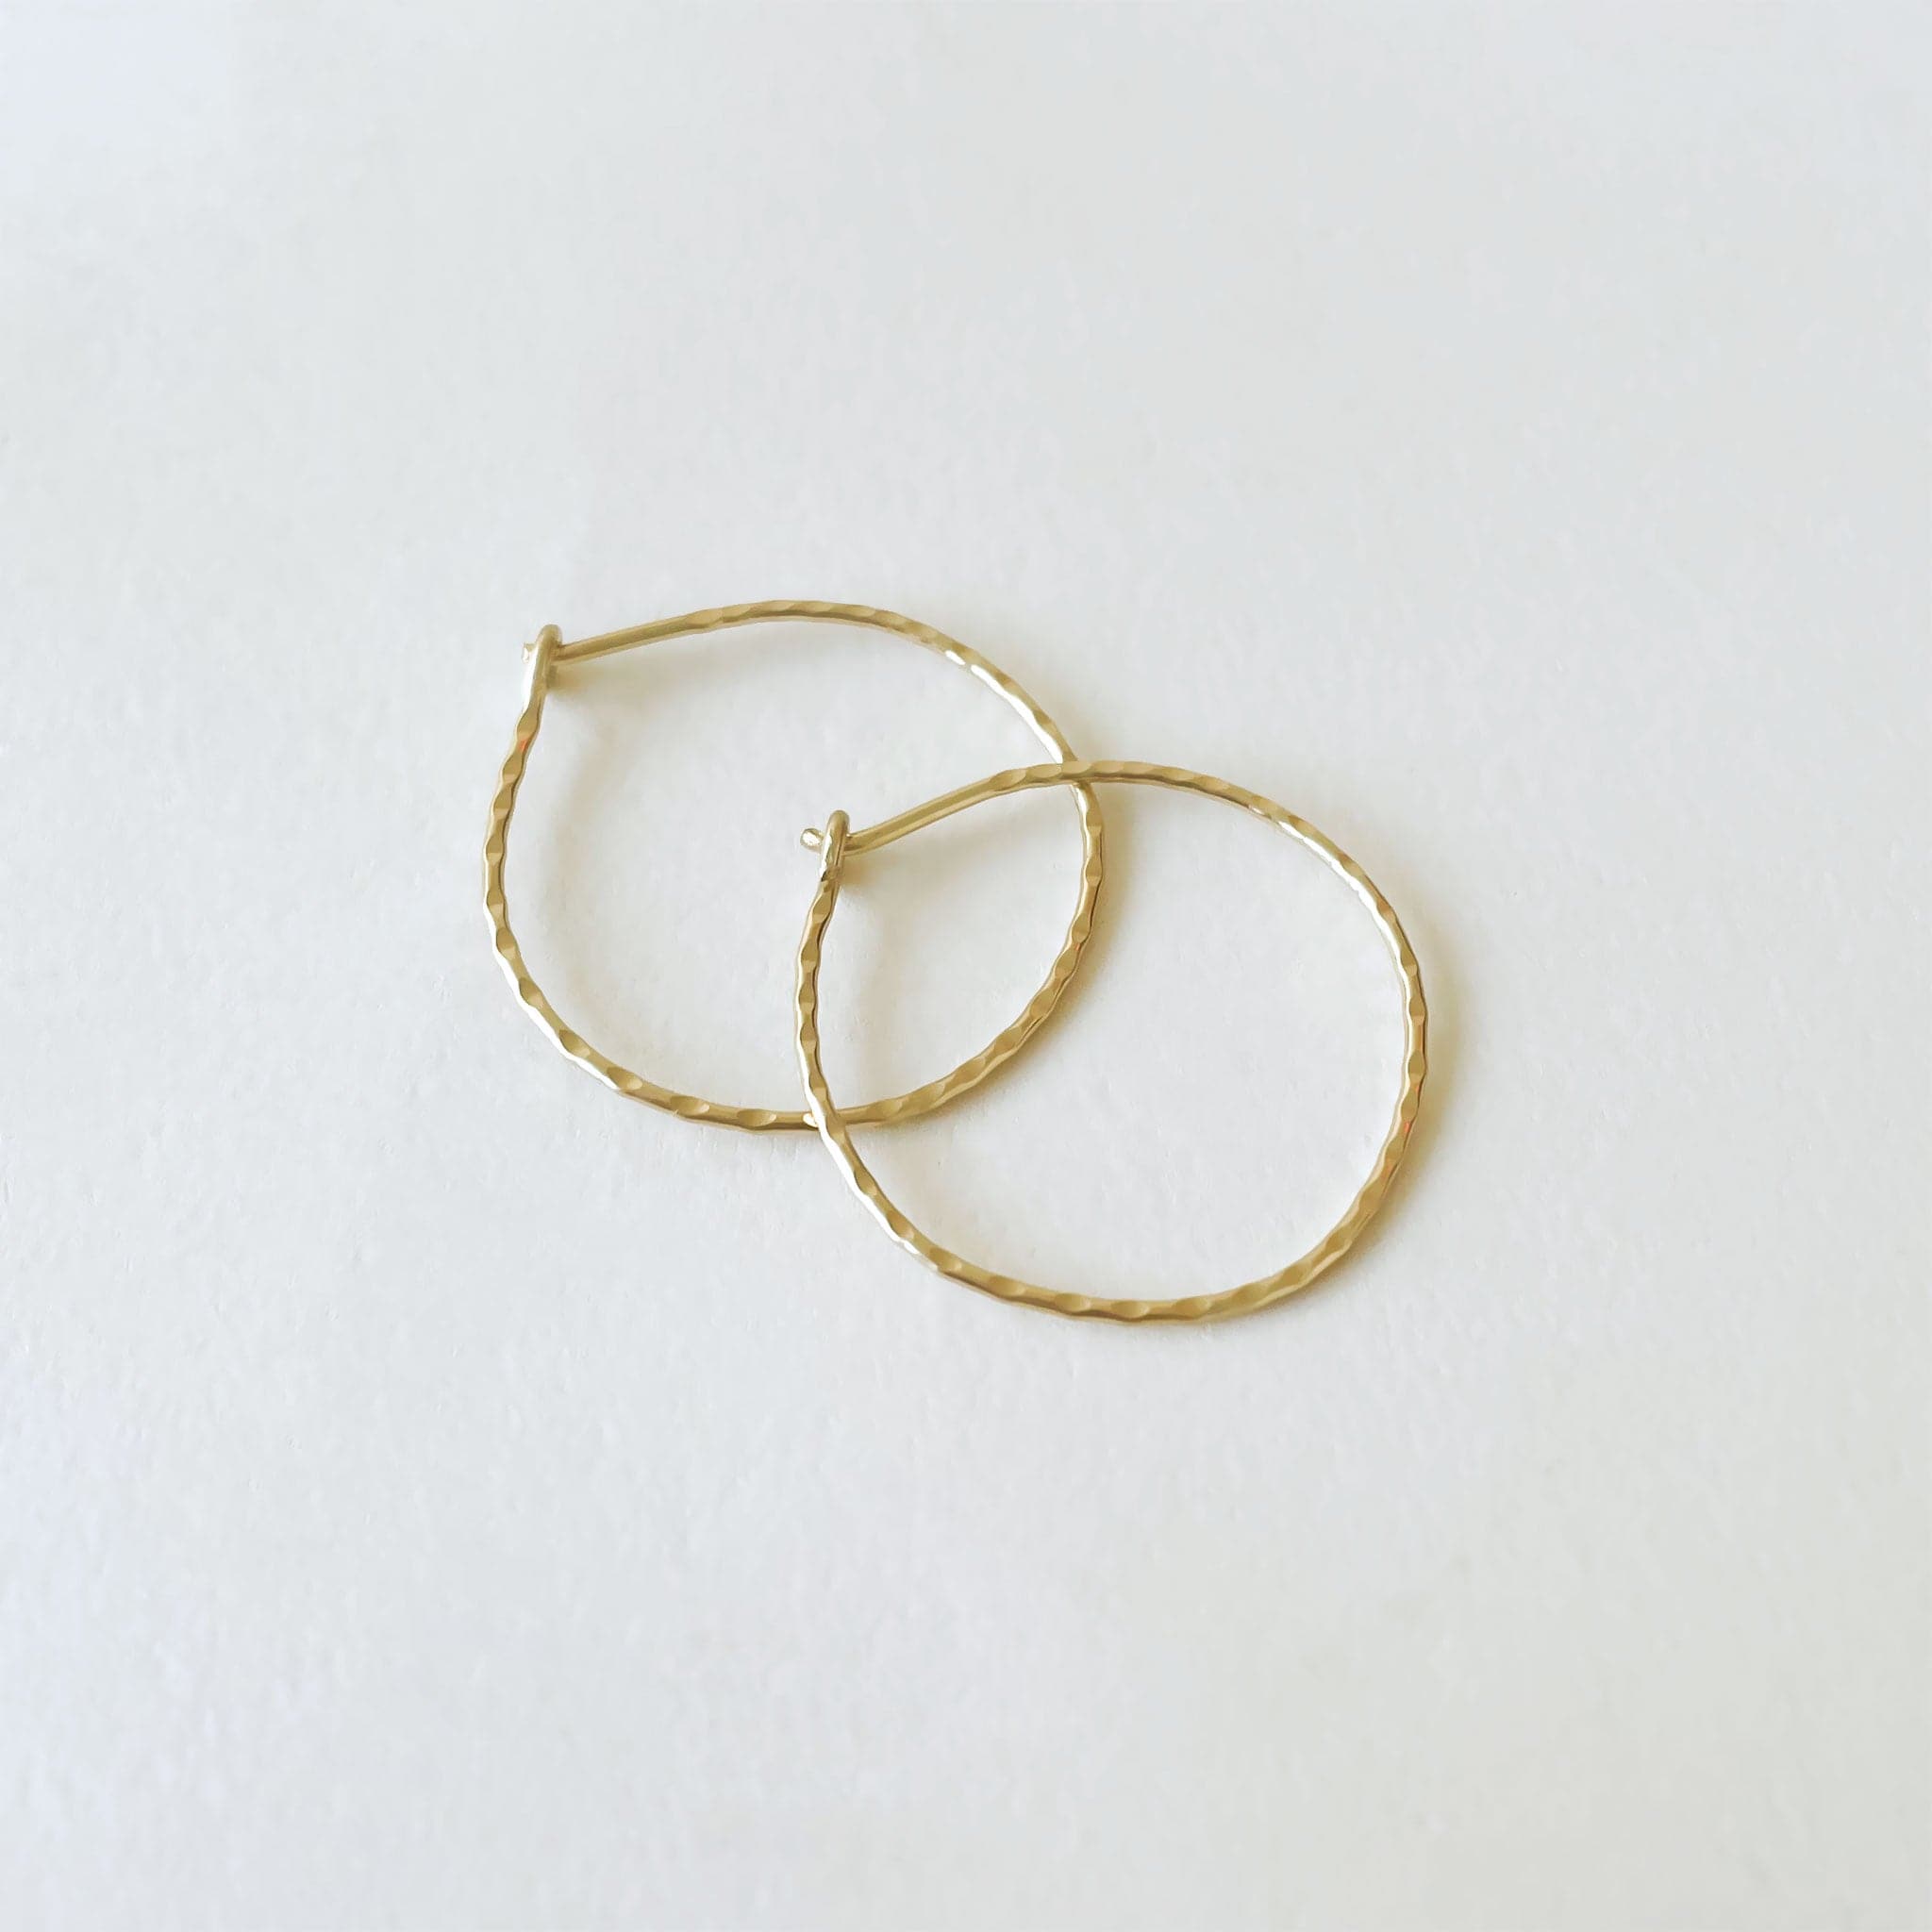 The medium size of the hammered 14k hoops.